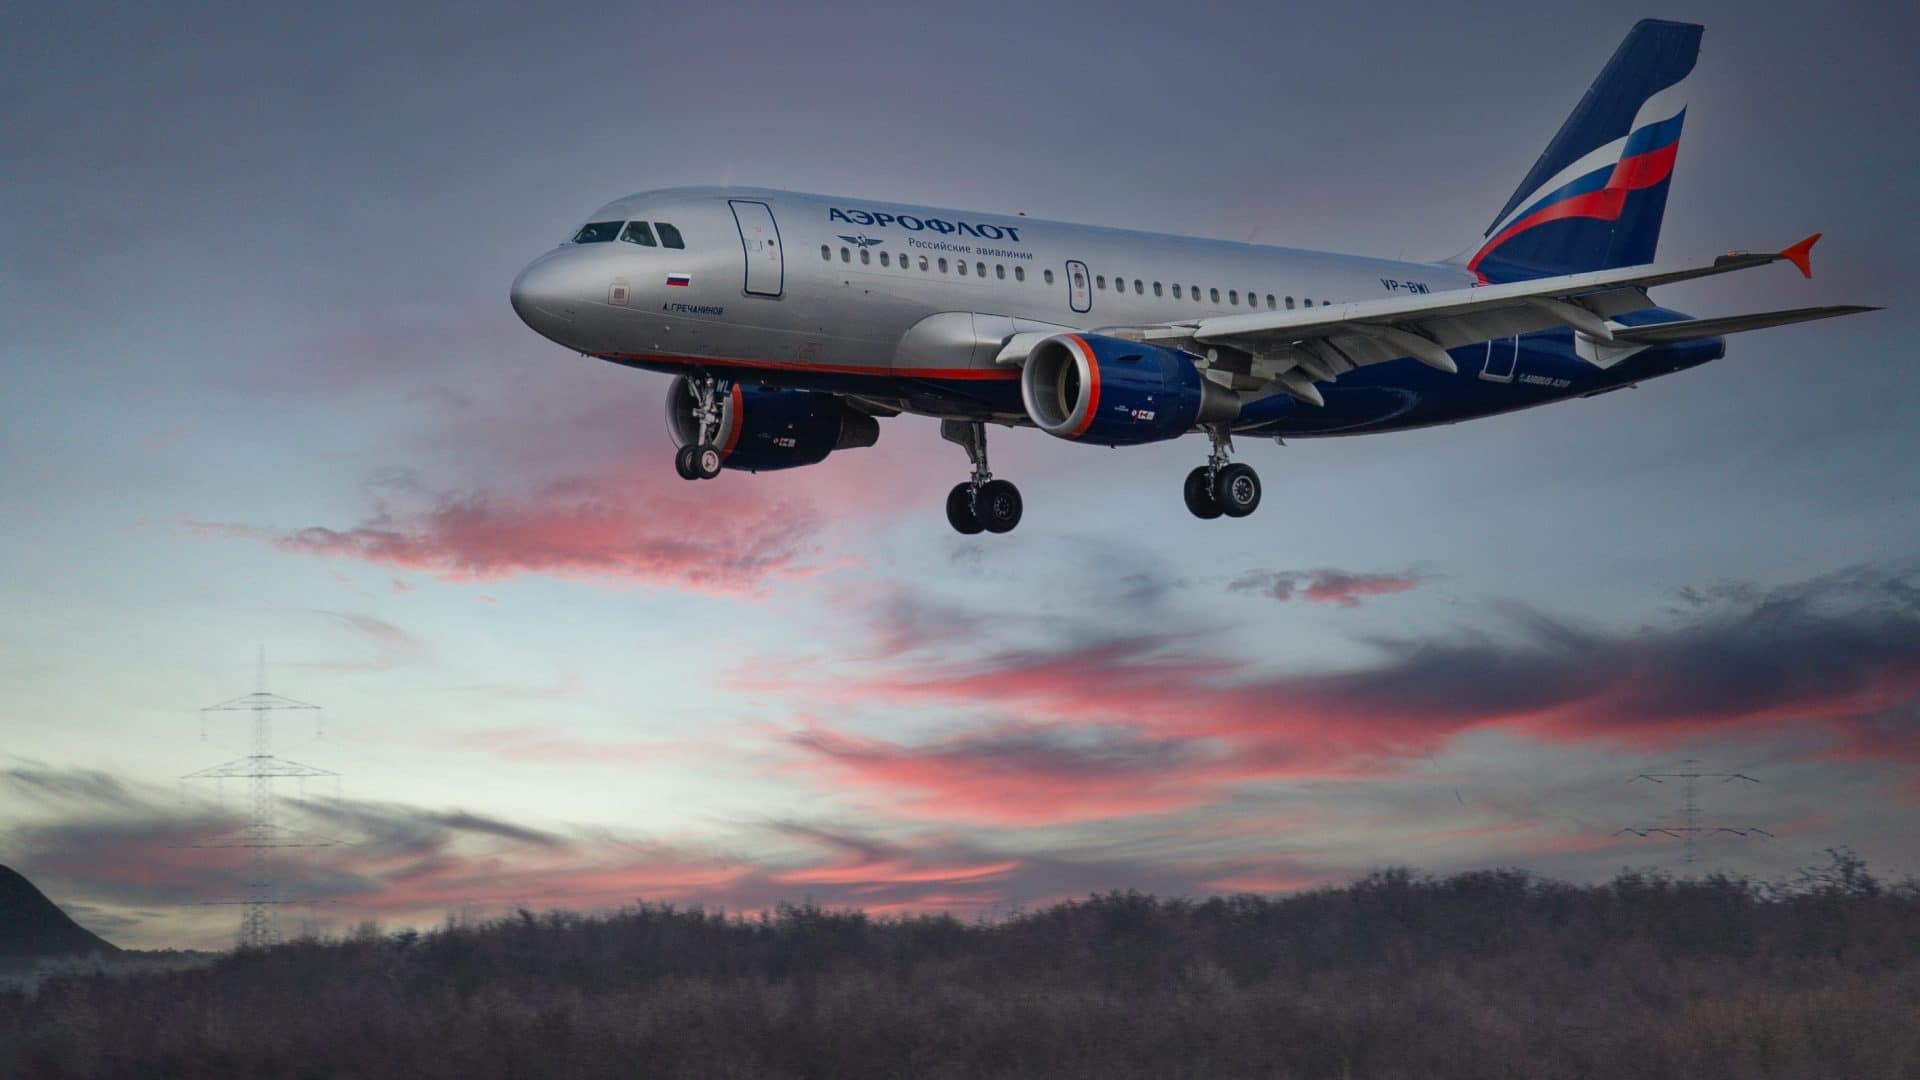 Aircraft chartered from Russia loses registration